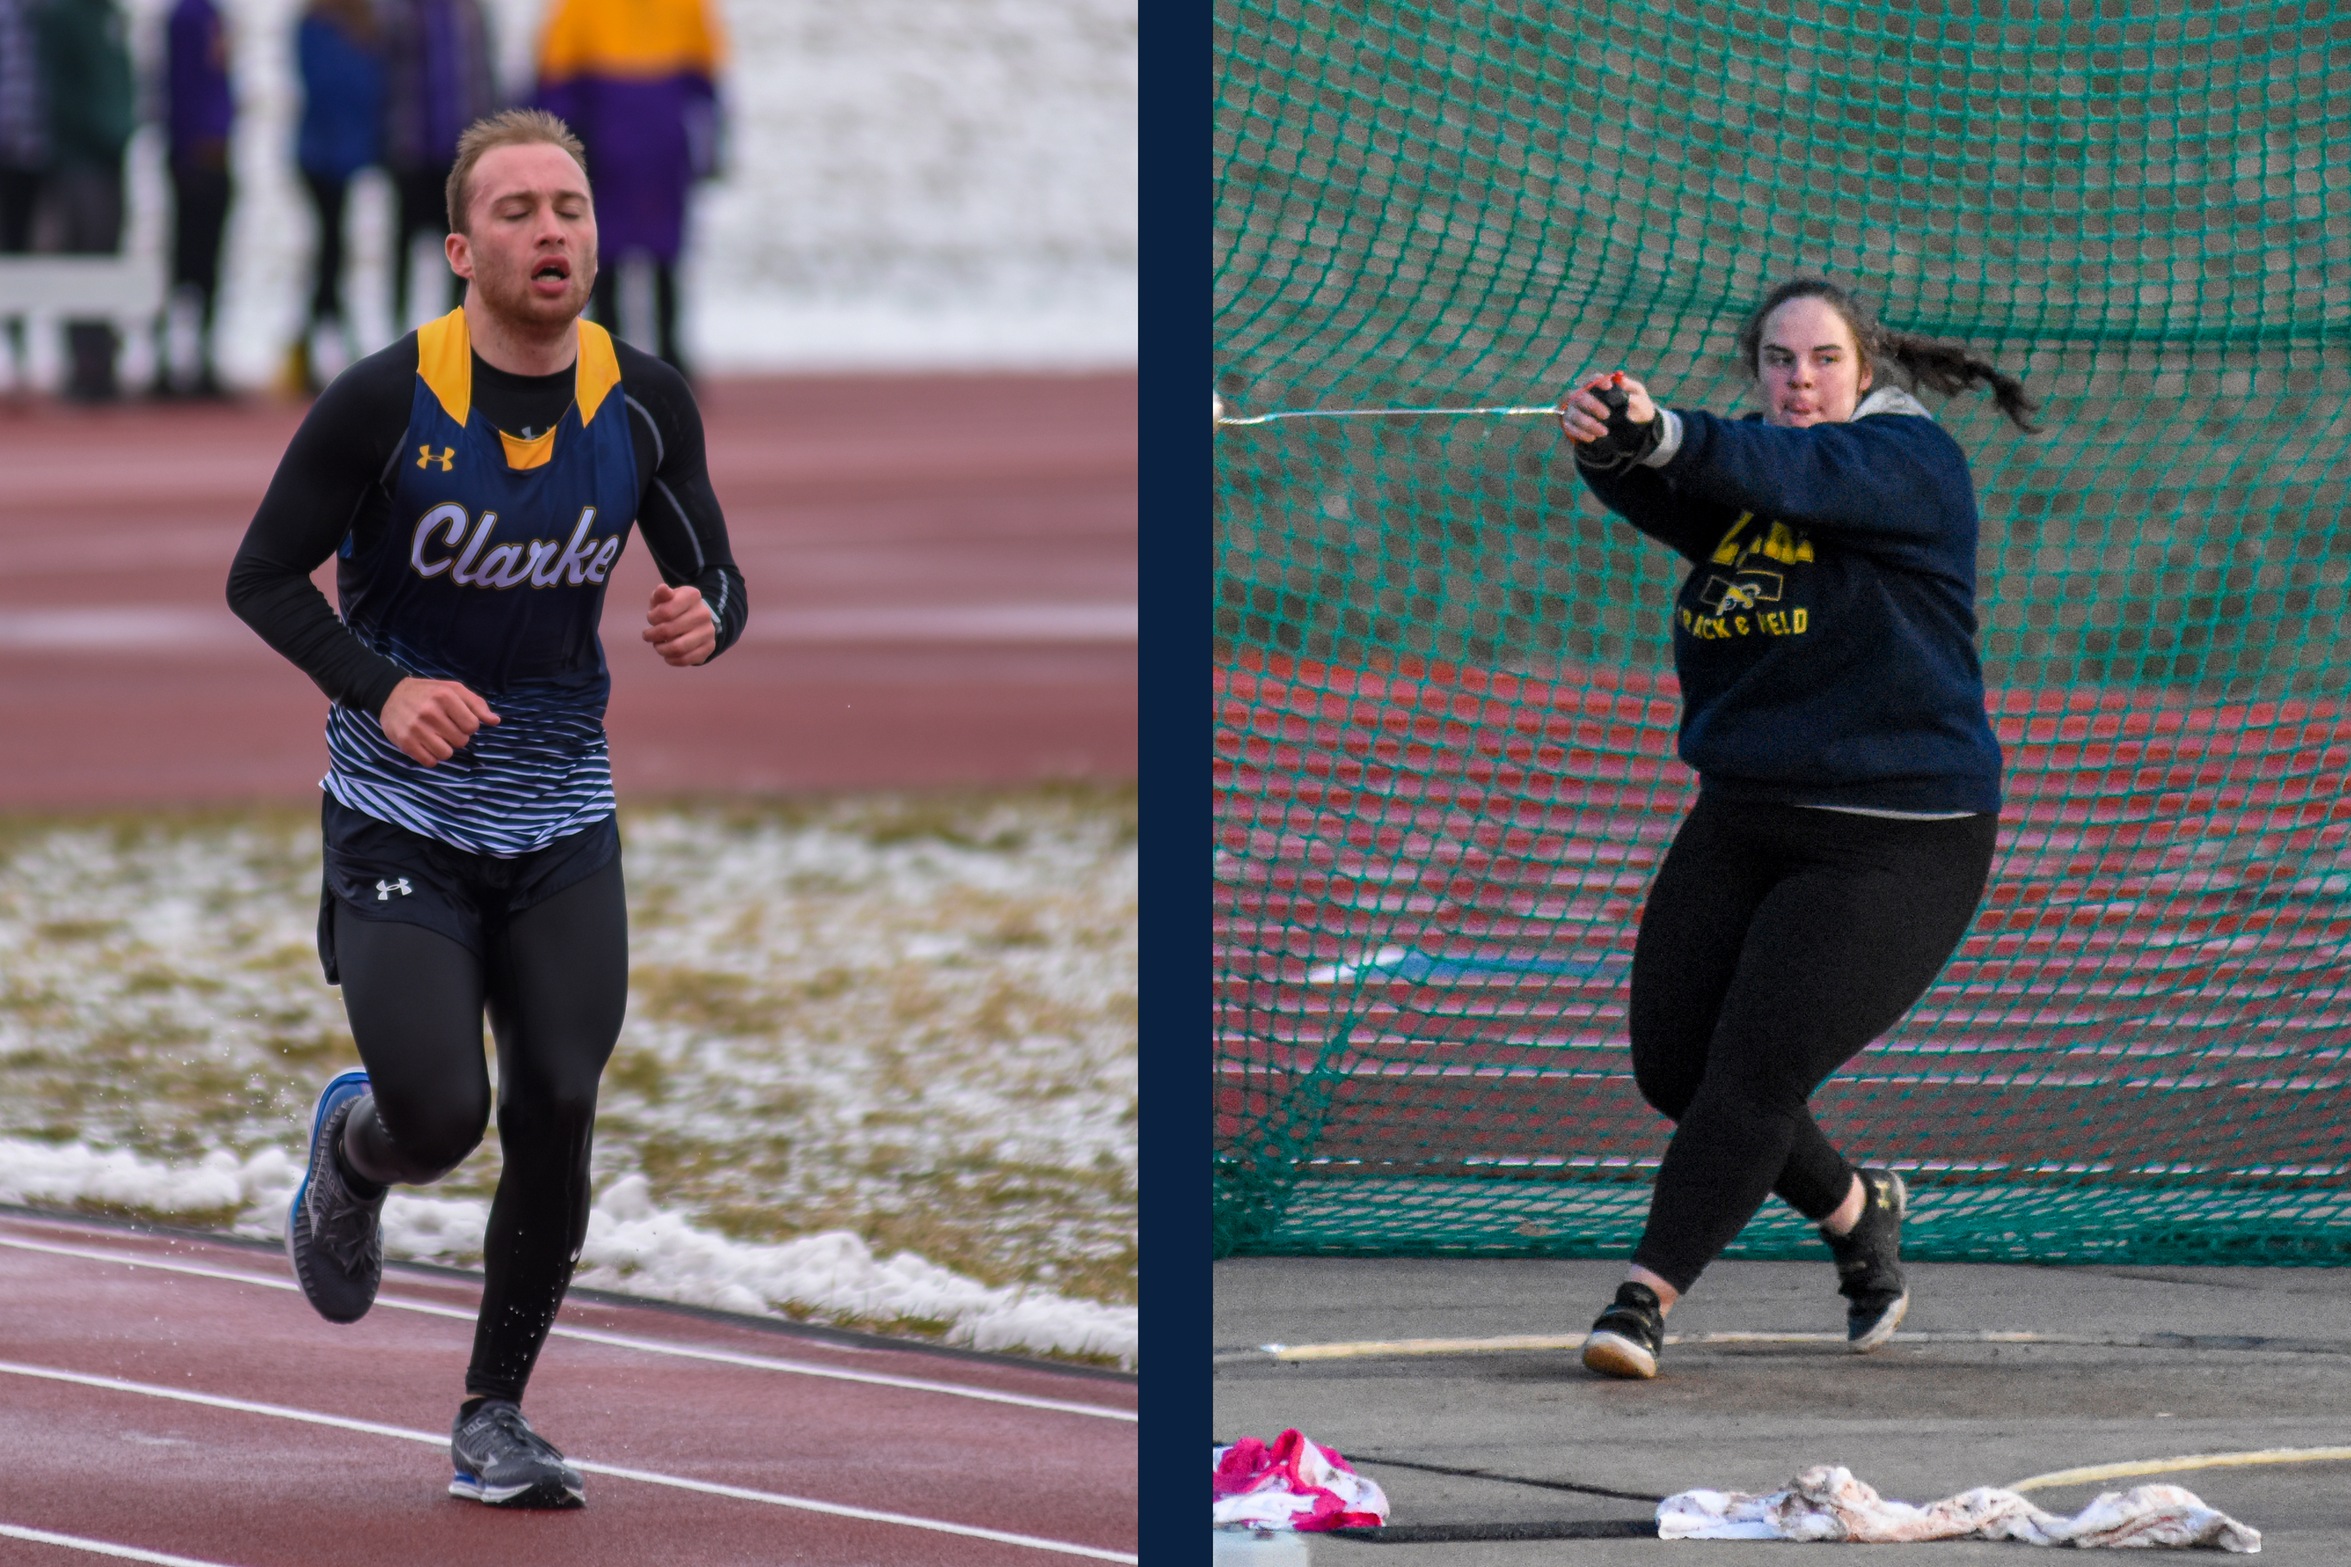 CU Records Six Top-Five Finishes at Easter Mid-Week